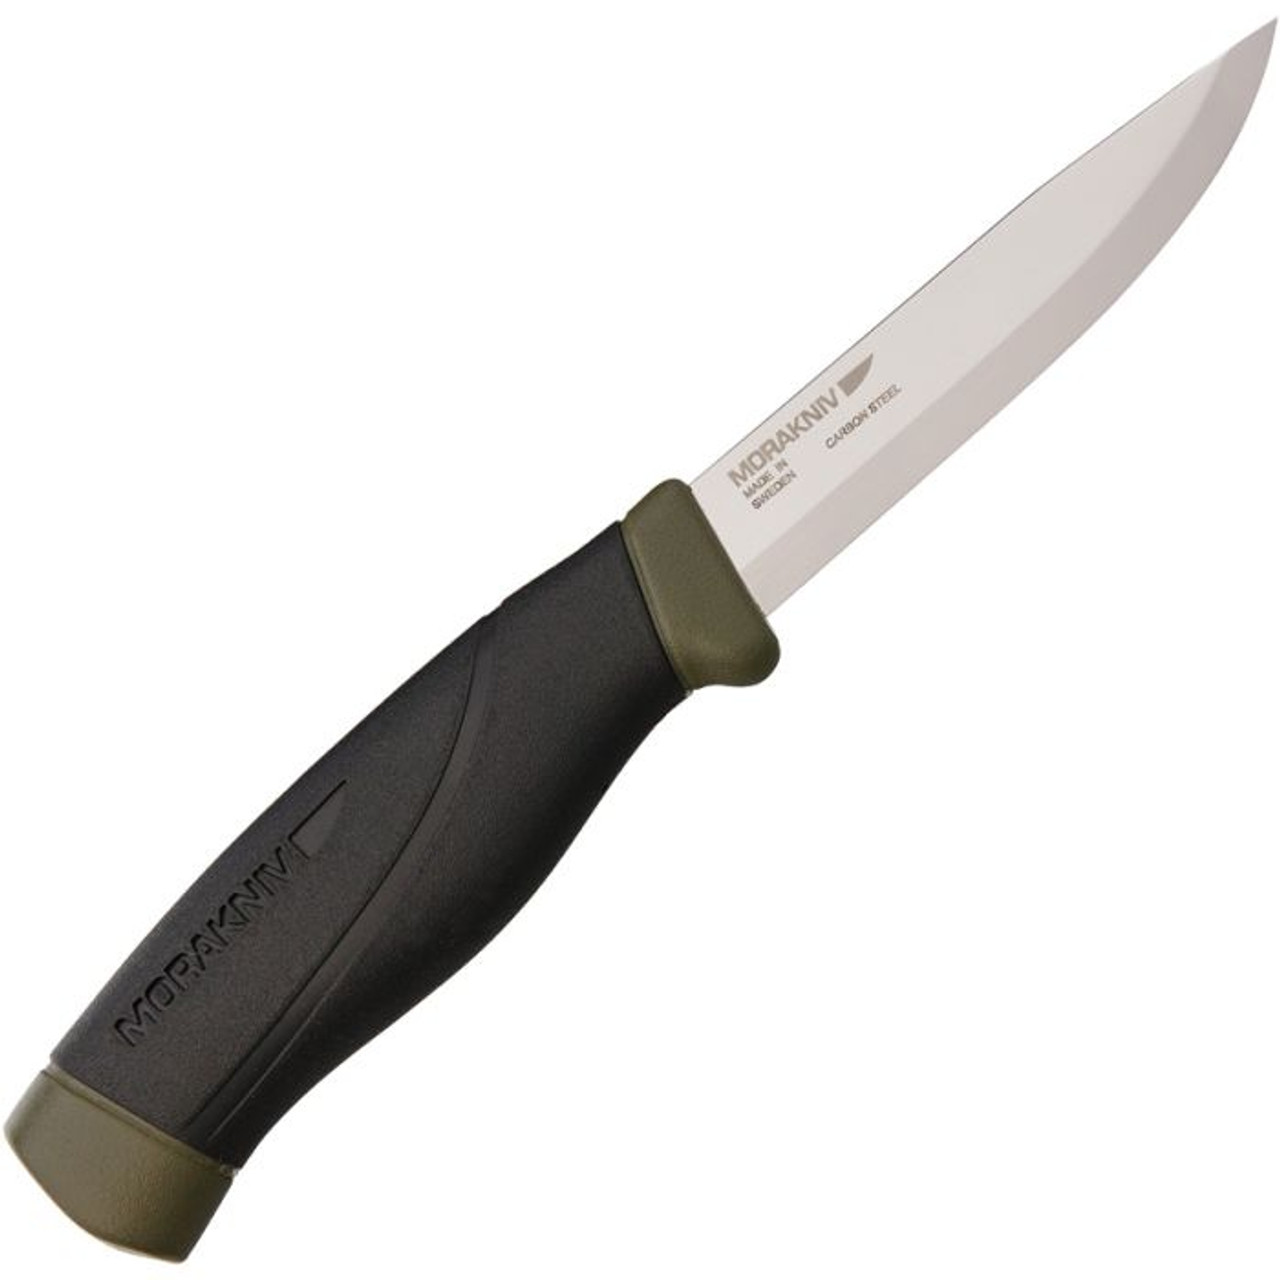 Chef's Knife - 55211